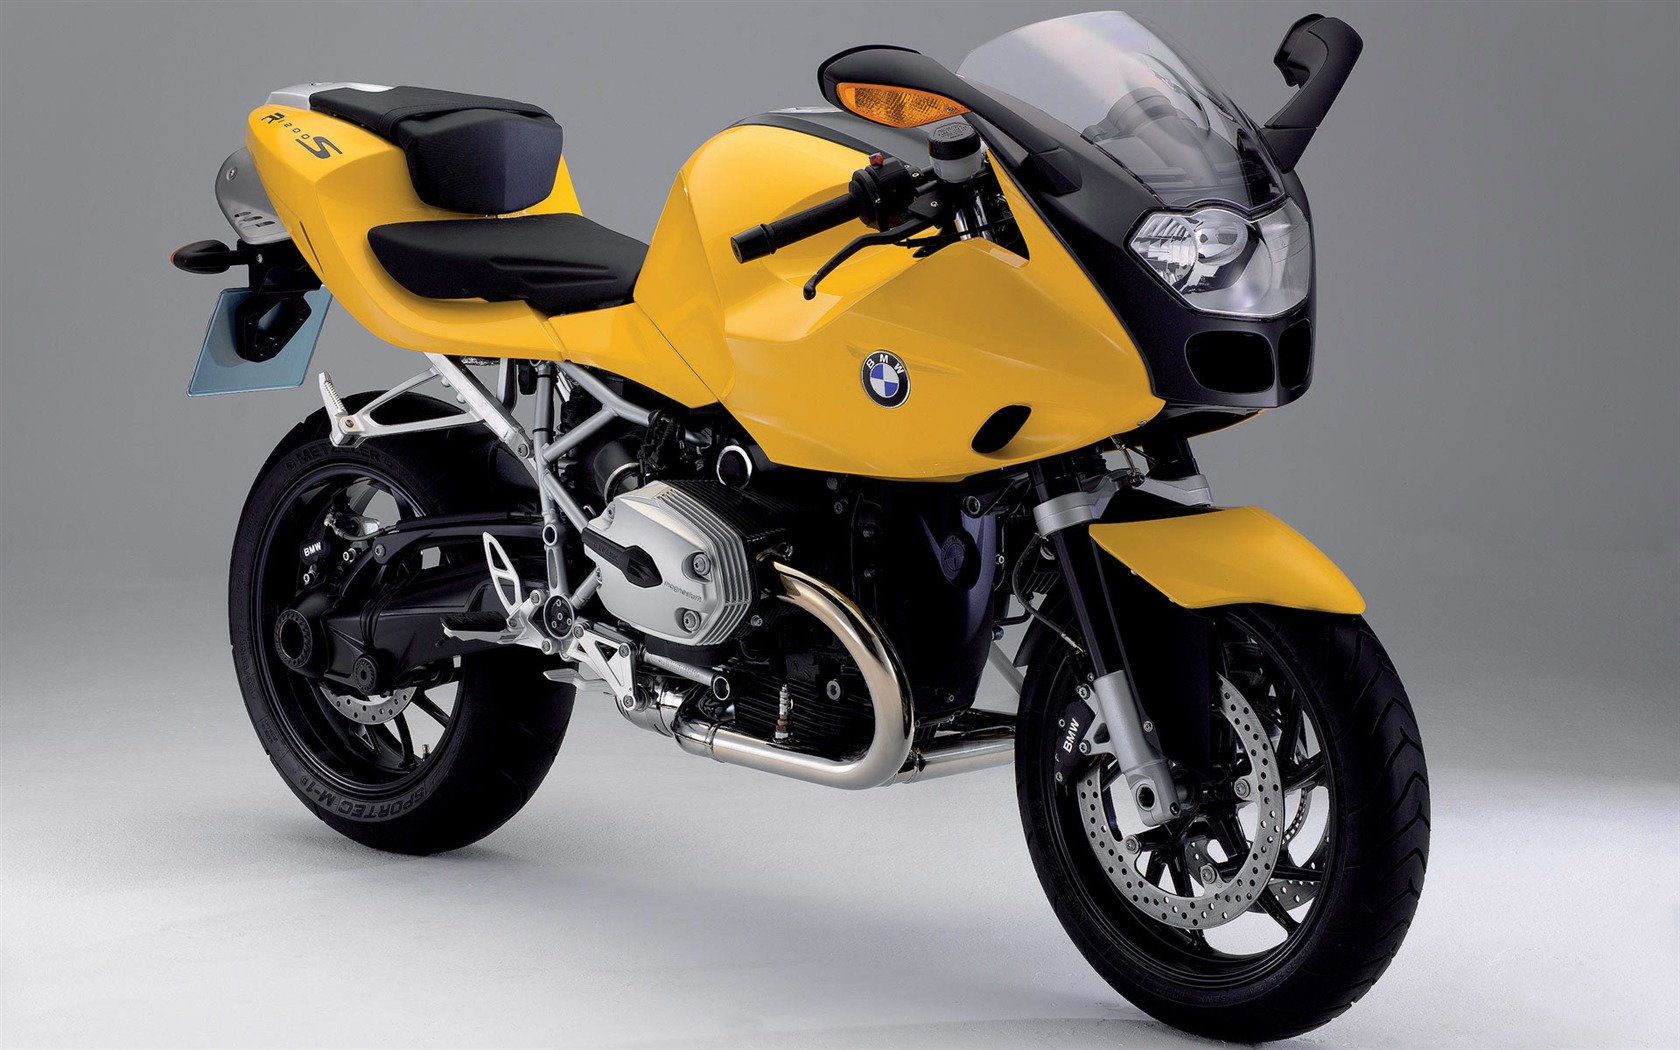 BMW motorcycle wallpapers (2) #5 - 1680x1050